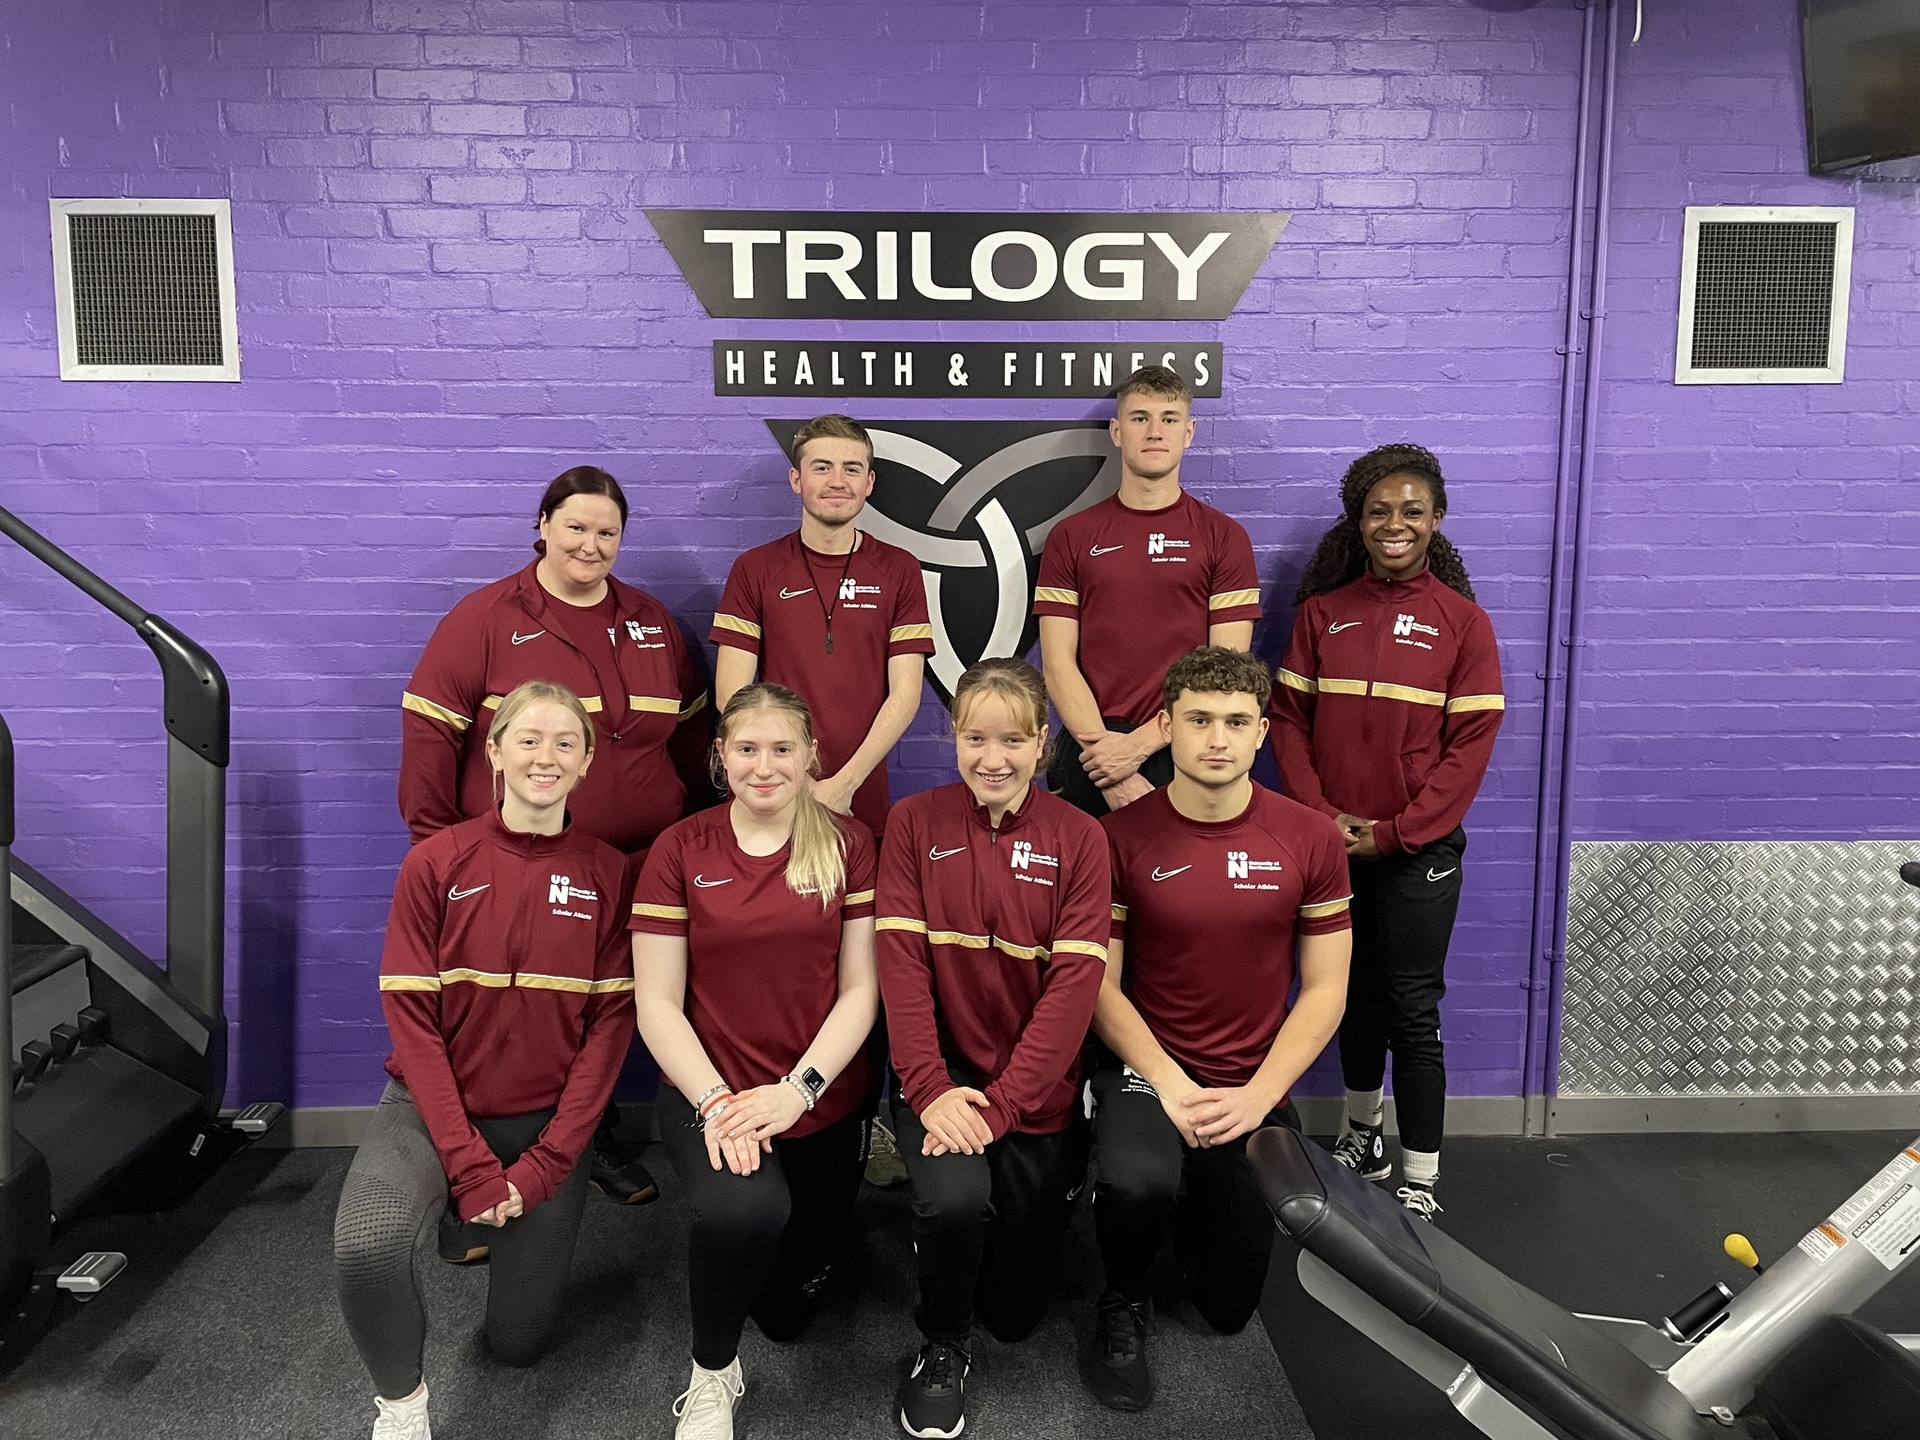 Members of the Trilogy Talented Athlete Scheme